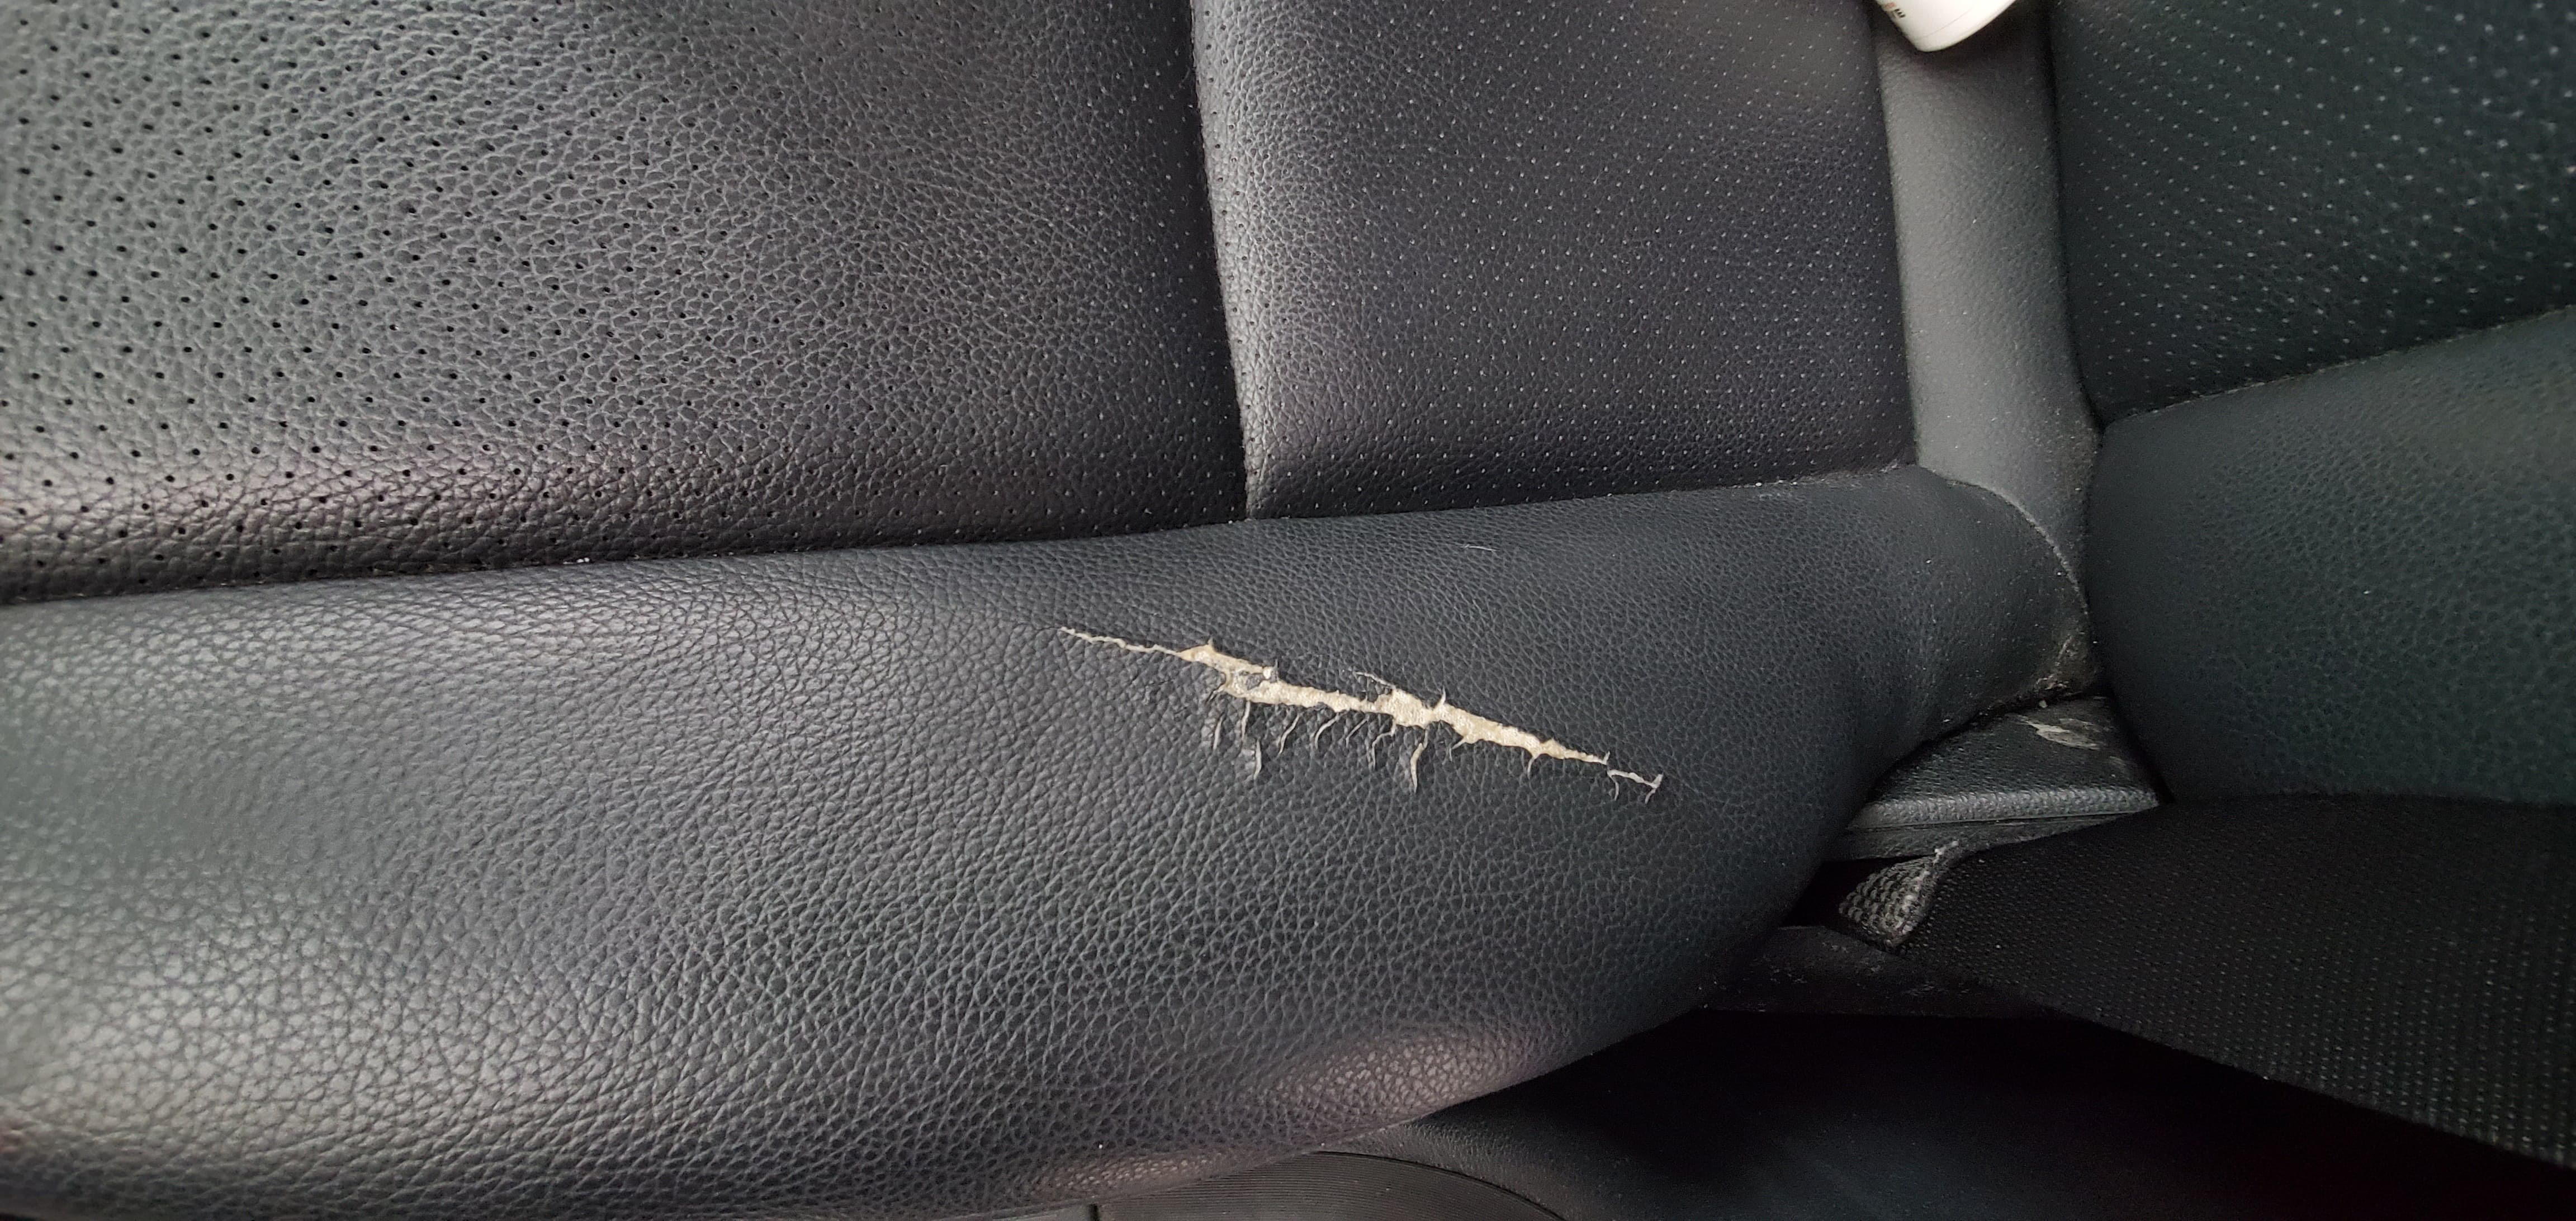 How To Repair A Leather Car Seat - How To Repair Tear In Leather Seat